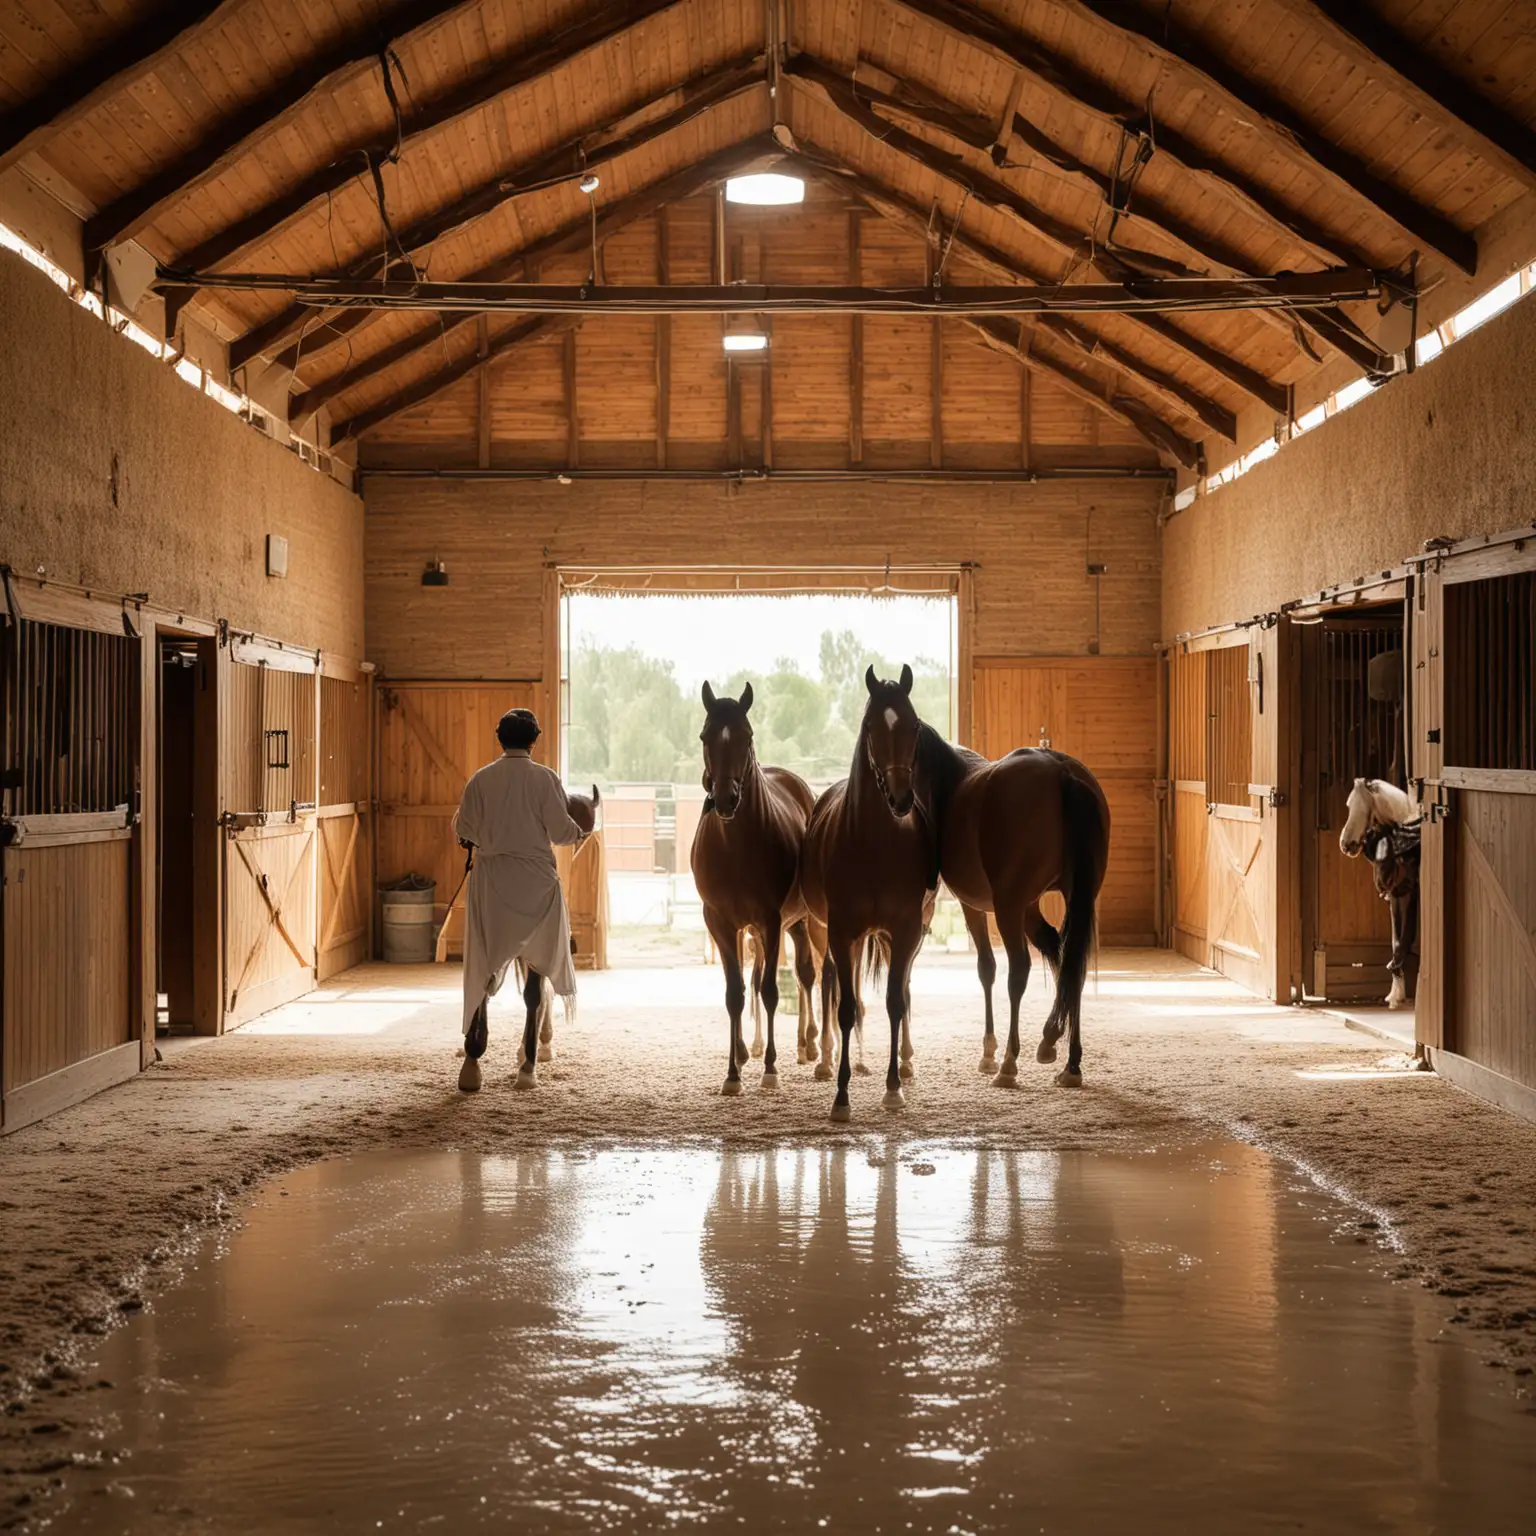 Bright Arabian Horse Stable Warm Atmosphere and Friendly Encounters